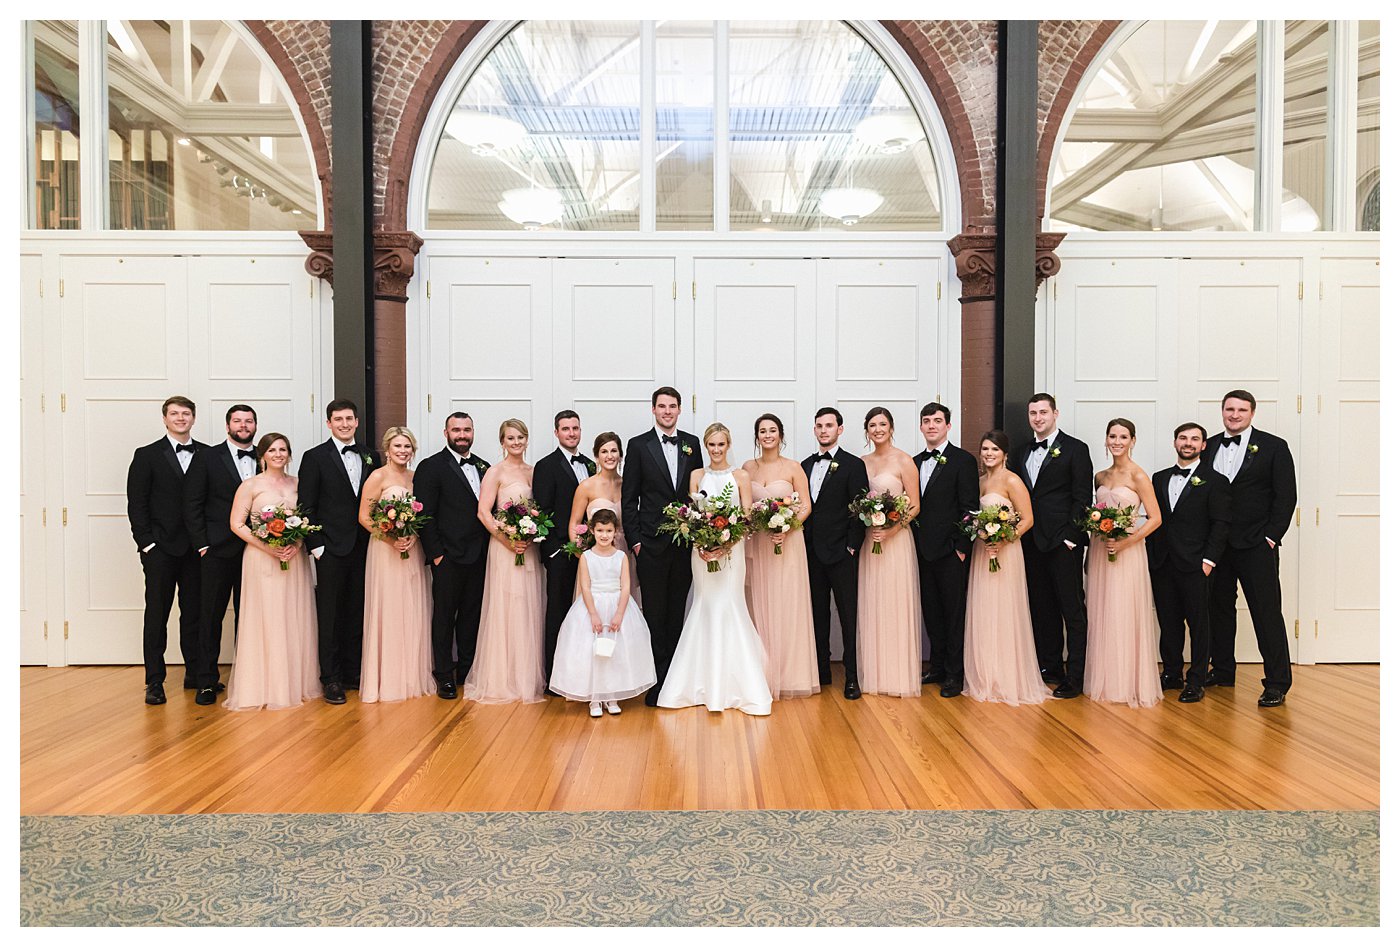 Downtown Raleigh Wedding with Blush Bridal Party